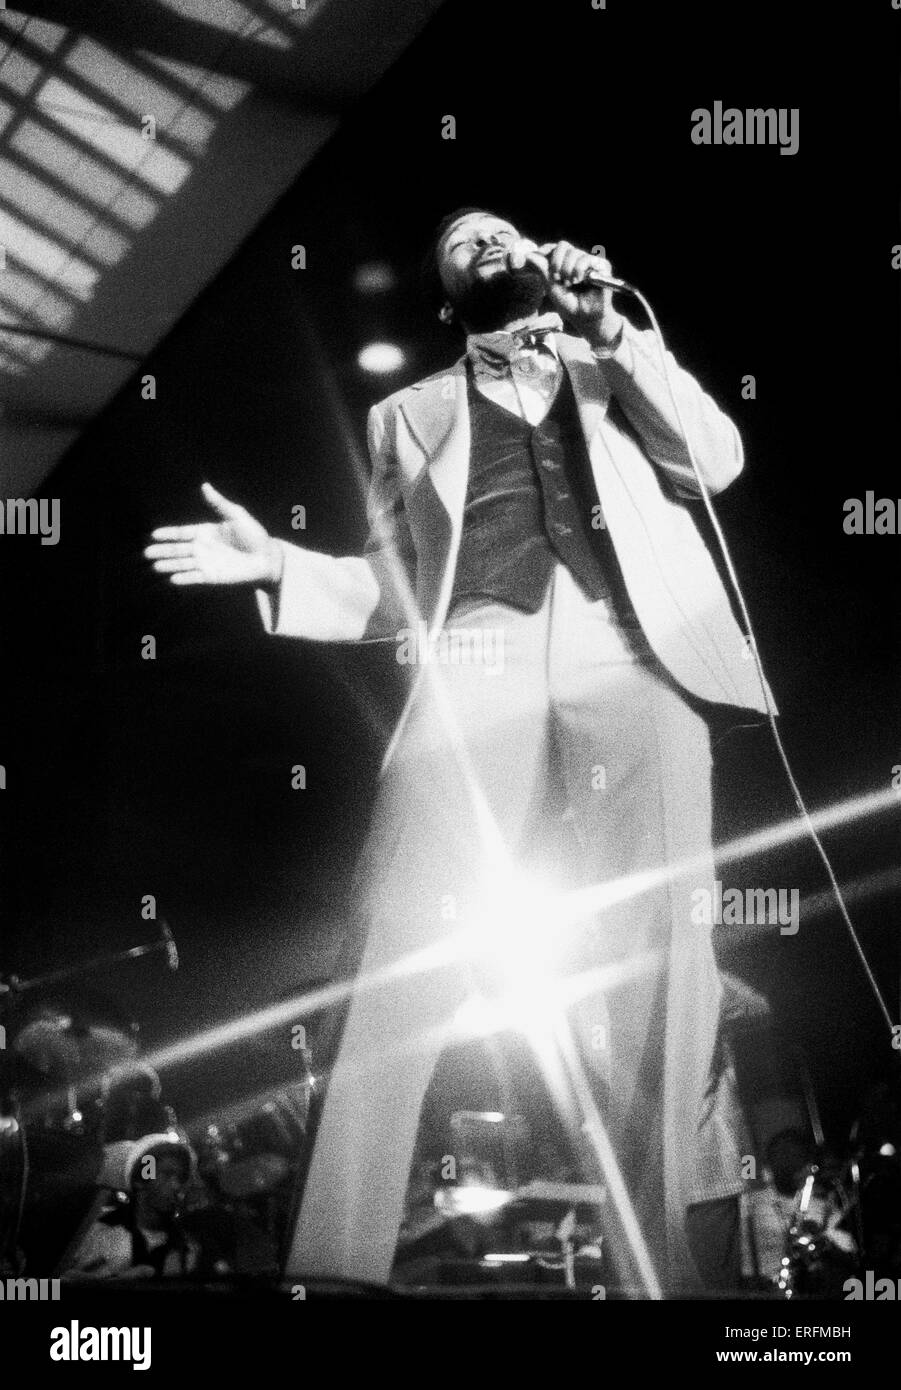 Marvin Gaye - portrait of the American soul and R&B singer performing at the Bingley Hall, Birmingham, England in 1976. MG: 2 Stock Photo